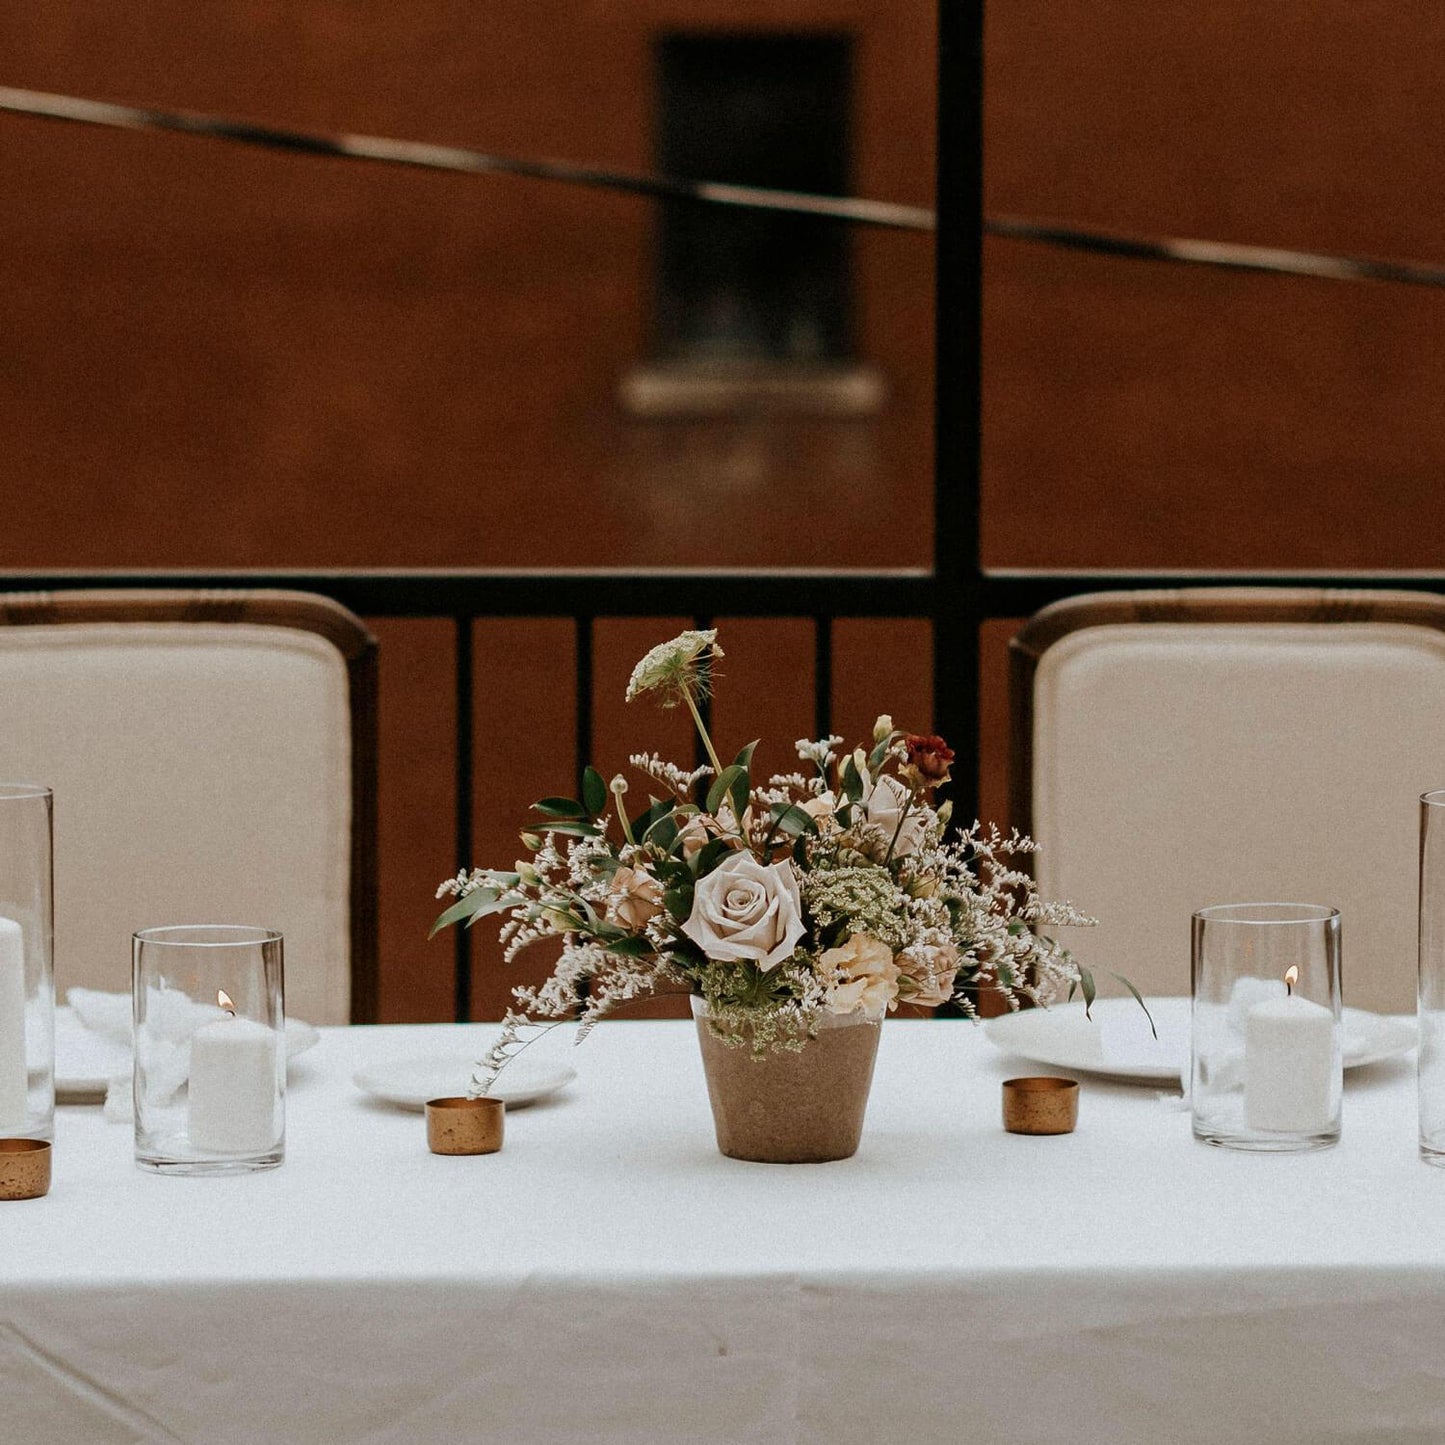 A table setting with a floral centerpiece, candles, and chairs in an indoor environment. Order online for wedding & event flowers from the best florist in Toronto near you.